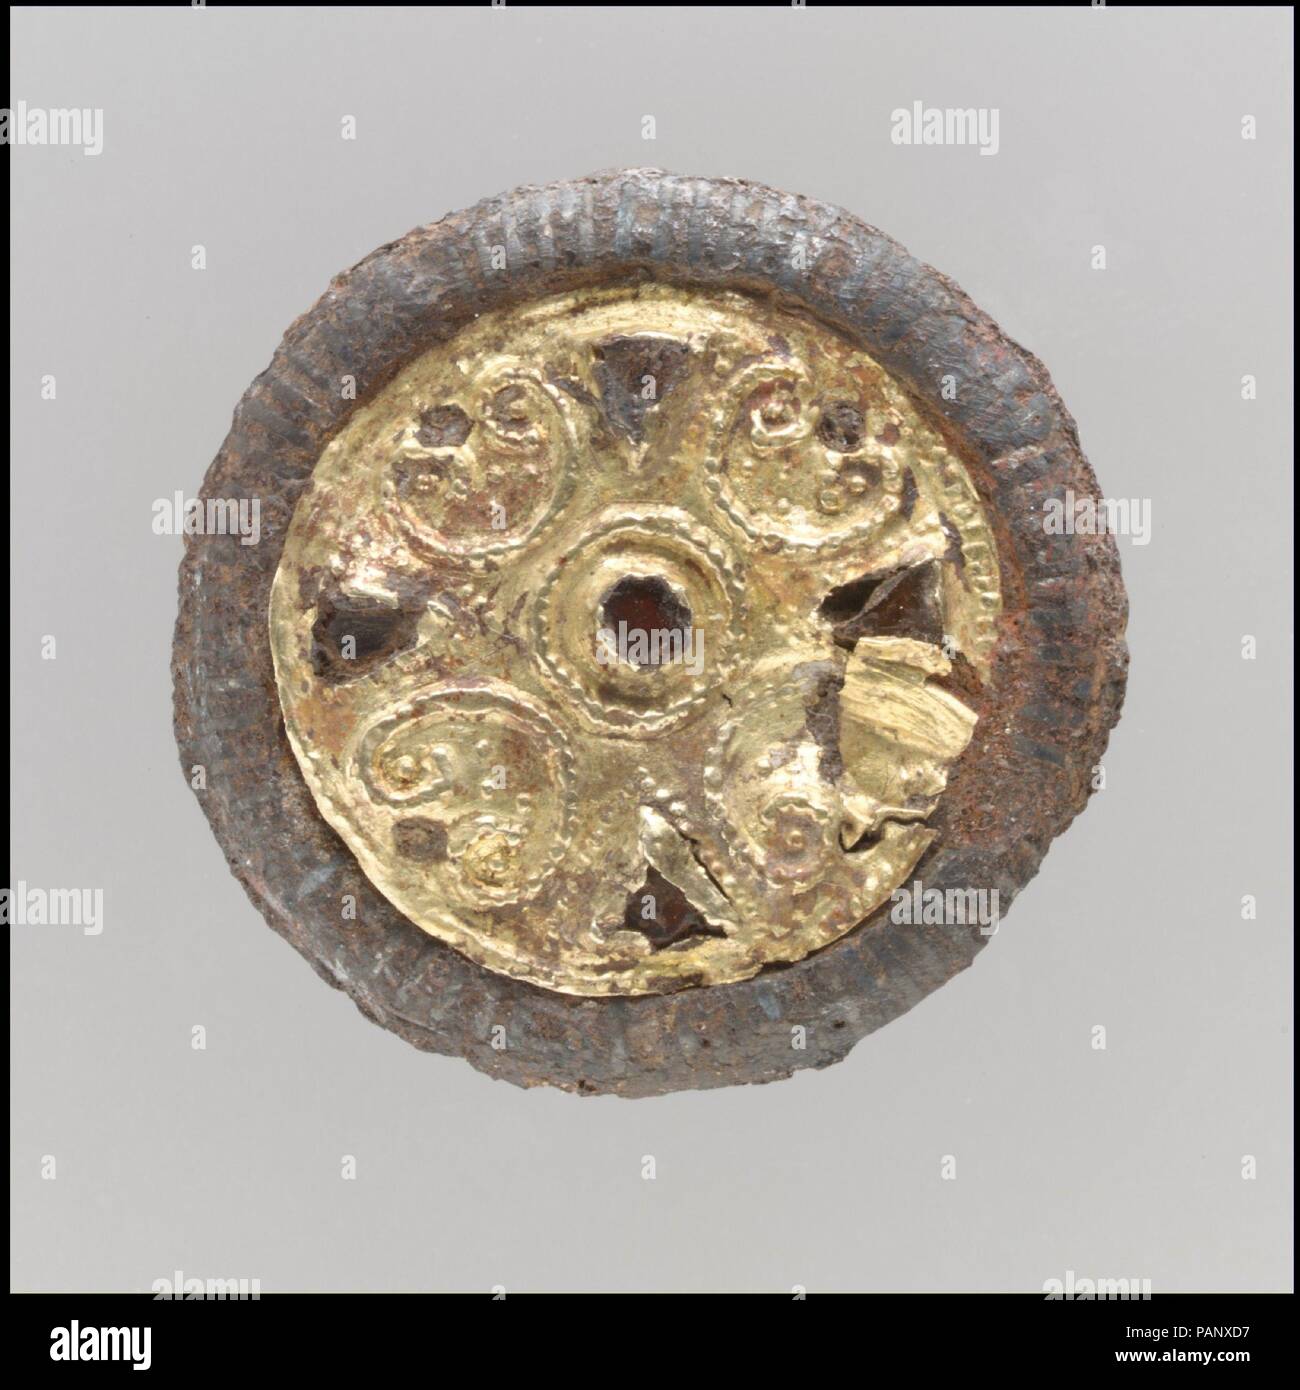 Disk Brooch. Culture: Frankish. Dimensions: Overall: 1 3/16 x 3/8 in. (3 x 0.9 cm). Date: late 6th-early 7th century. Museum: Metropolitan Museum of Art, New York, USA. Stock Photo